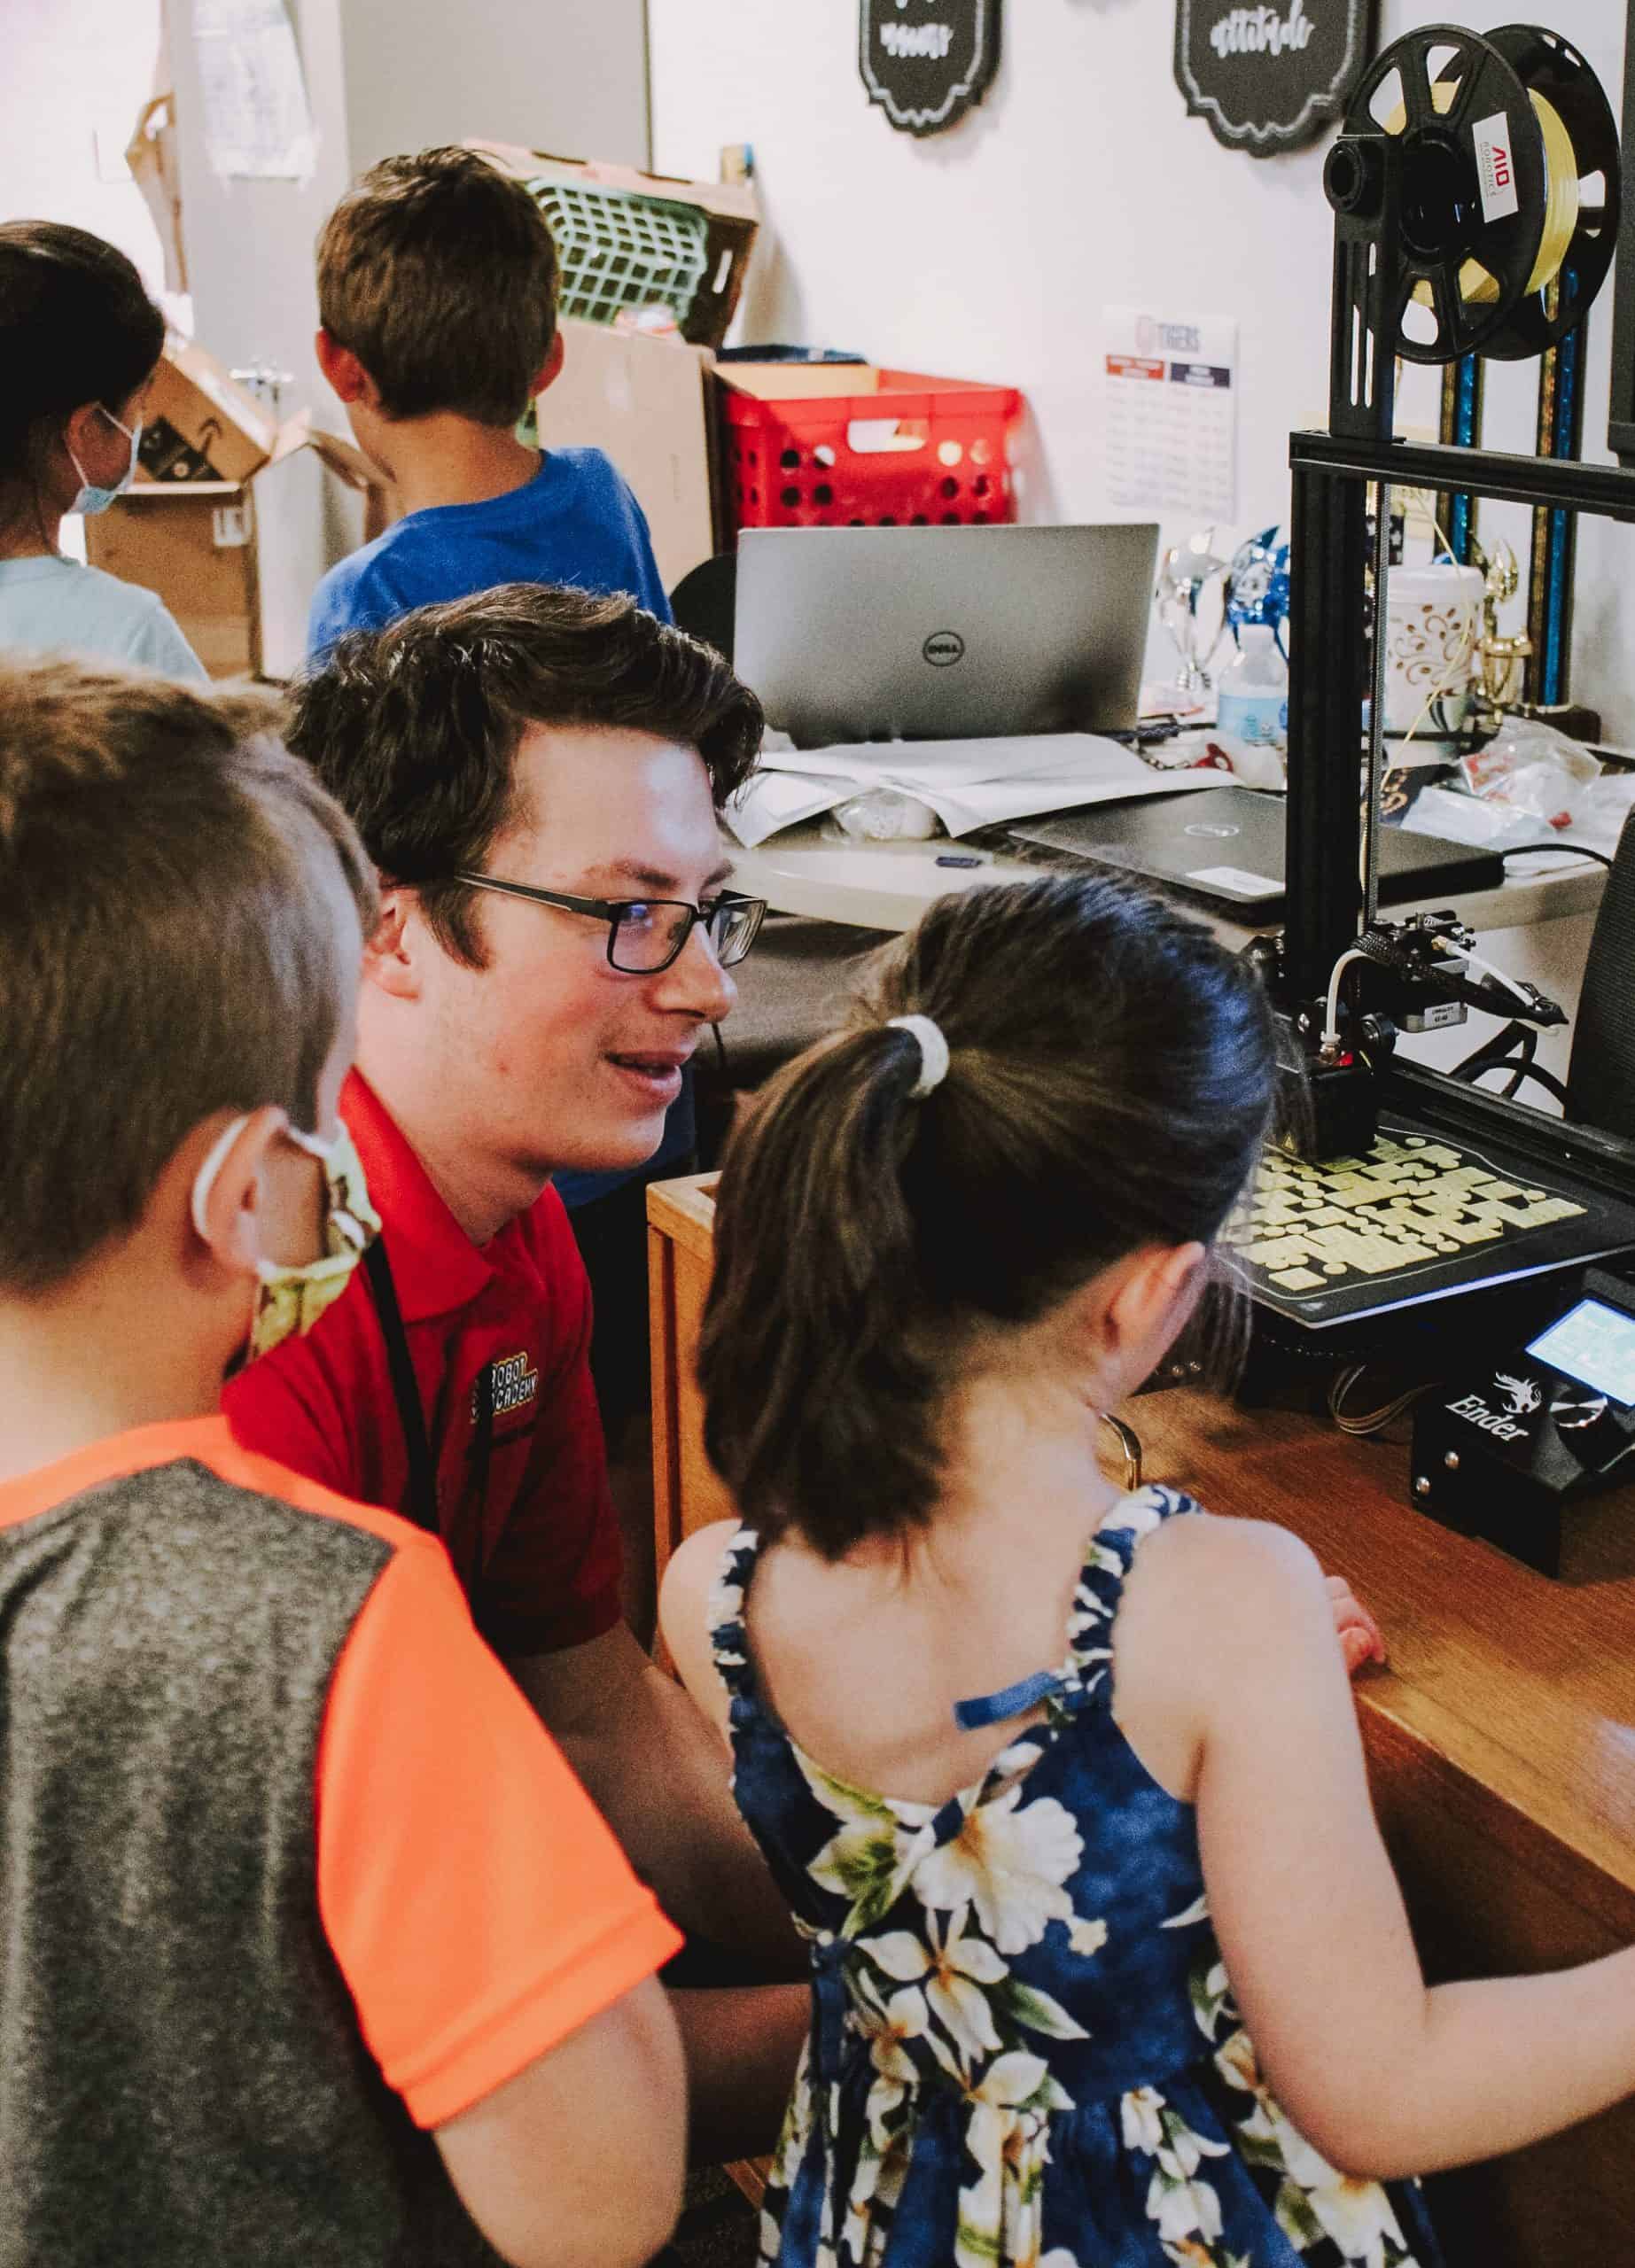 You are currently viewing Sr. LEGO® Robotics & 3D Printing Camp for ages 8 to 13 | Morning | 5 Days: June 26-30, 2023 | 9:30 am to 12:30 pm | Upper Arlington